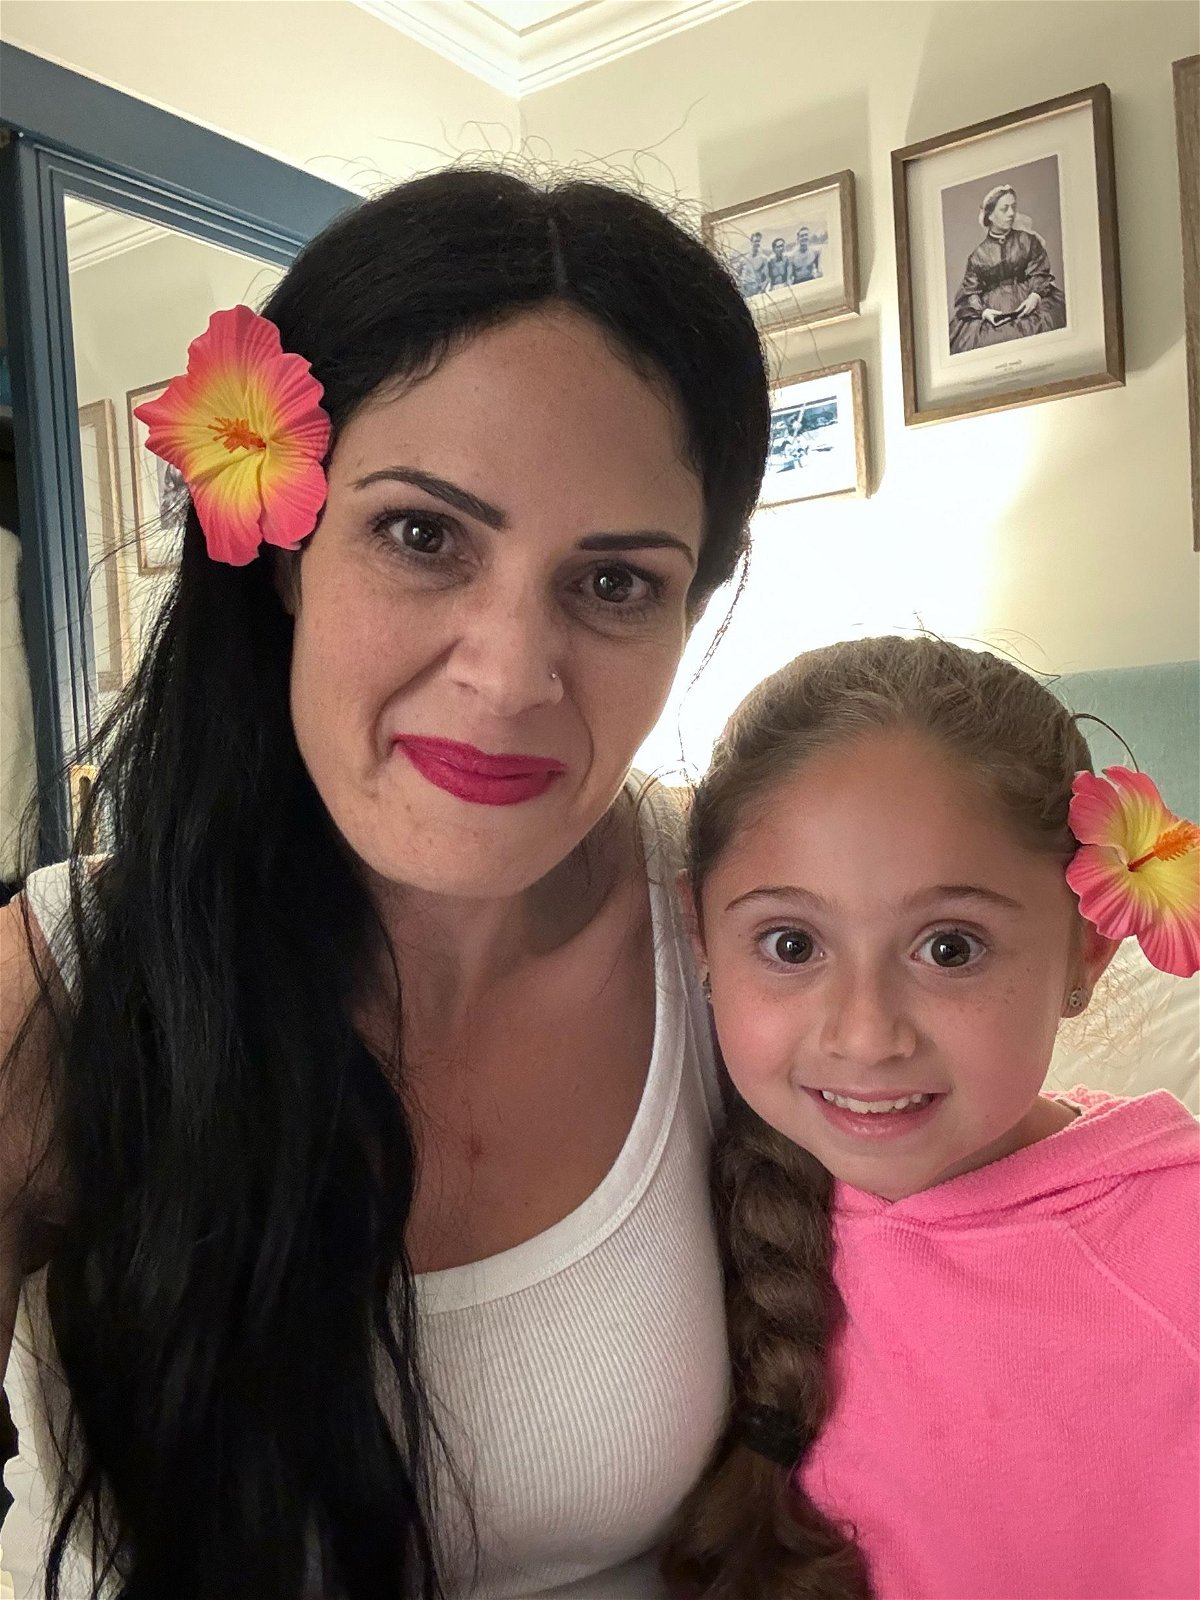 <i>Courtesy Michelle via CNN Newsource</i><br/>Michelle and Hannah are working hard to treat Hannah's ARFID diagnosis.